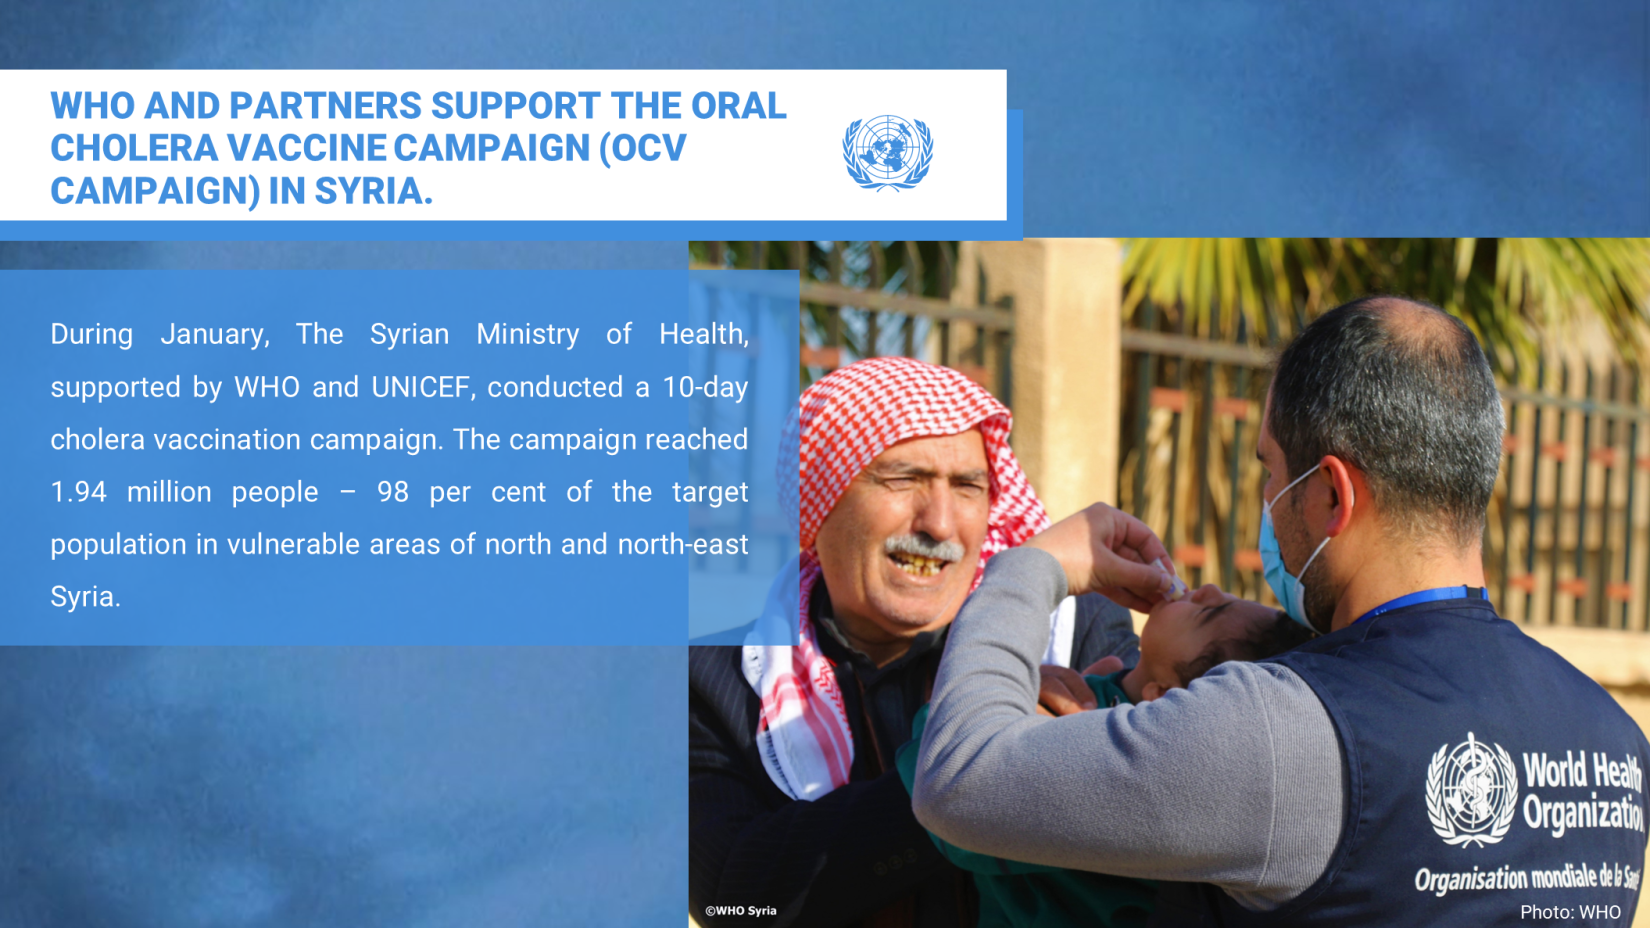 WHO AND PARTNERS SUPPORT THE ORAL CHOLERA VACCINE CAMPAIGN IN SYRIA.